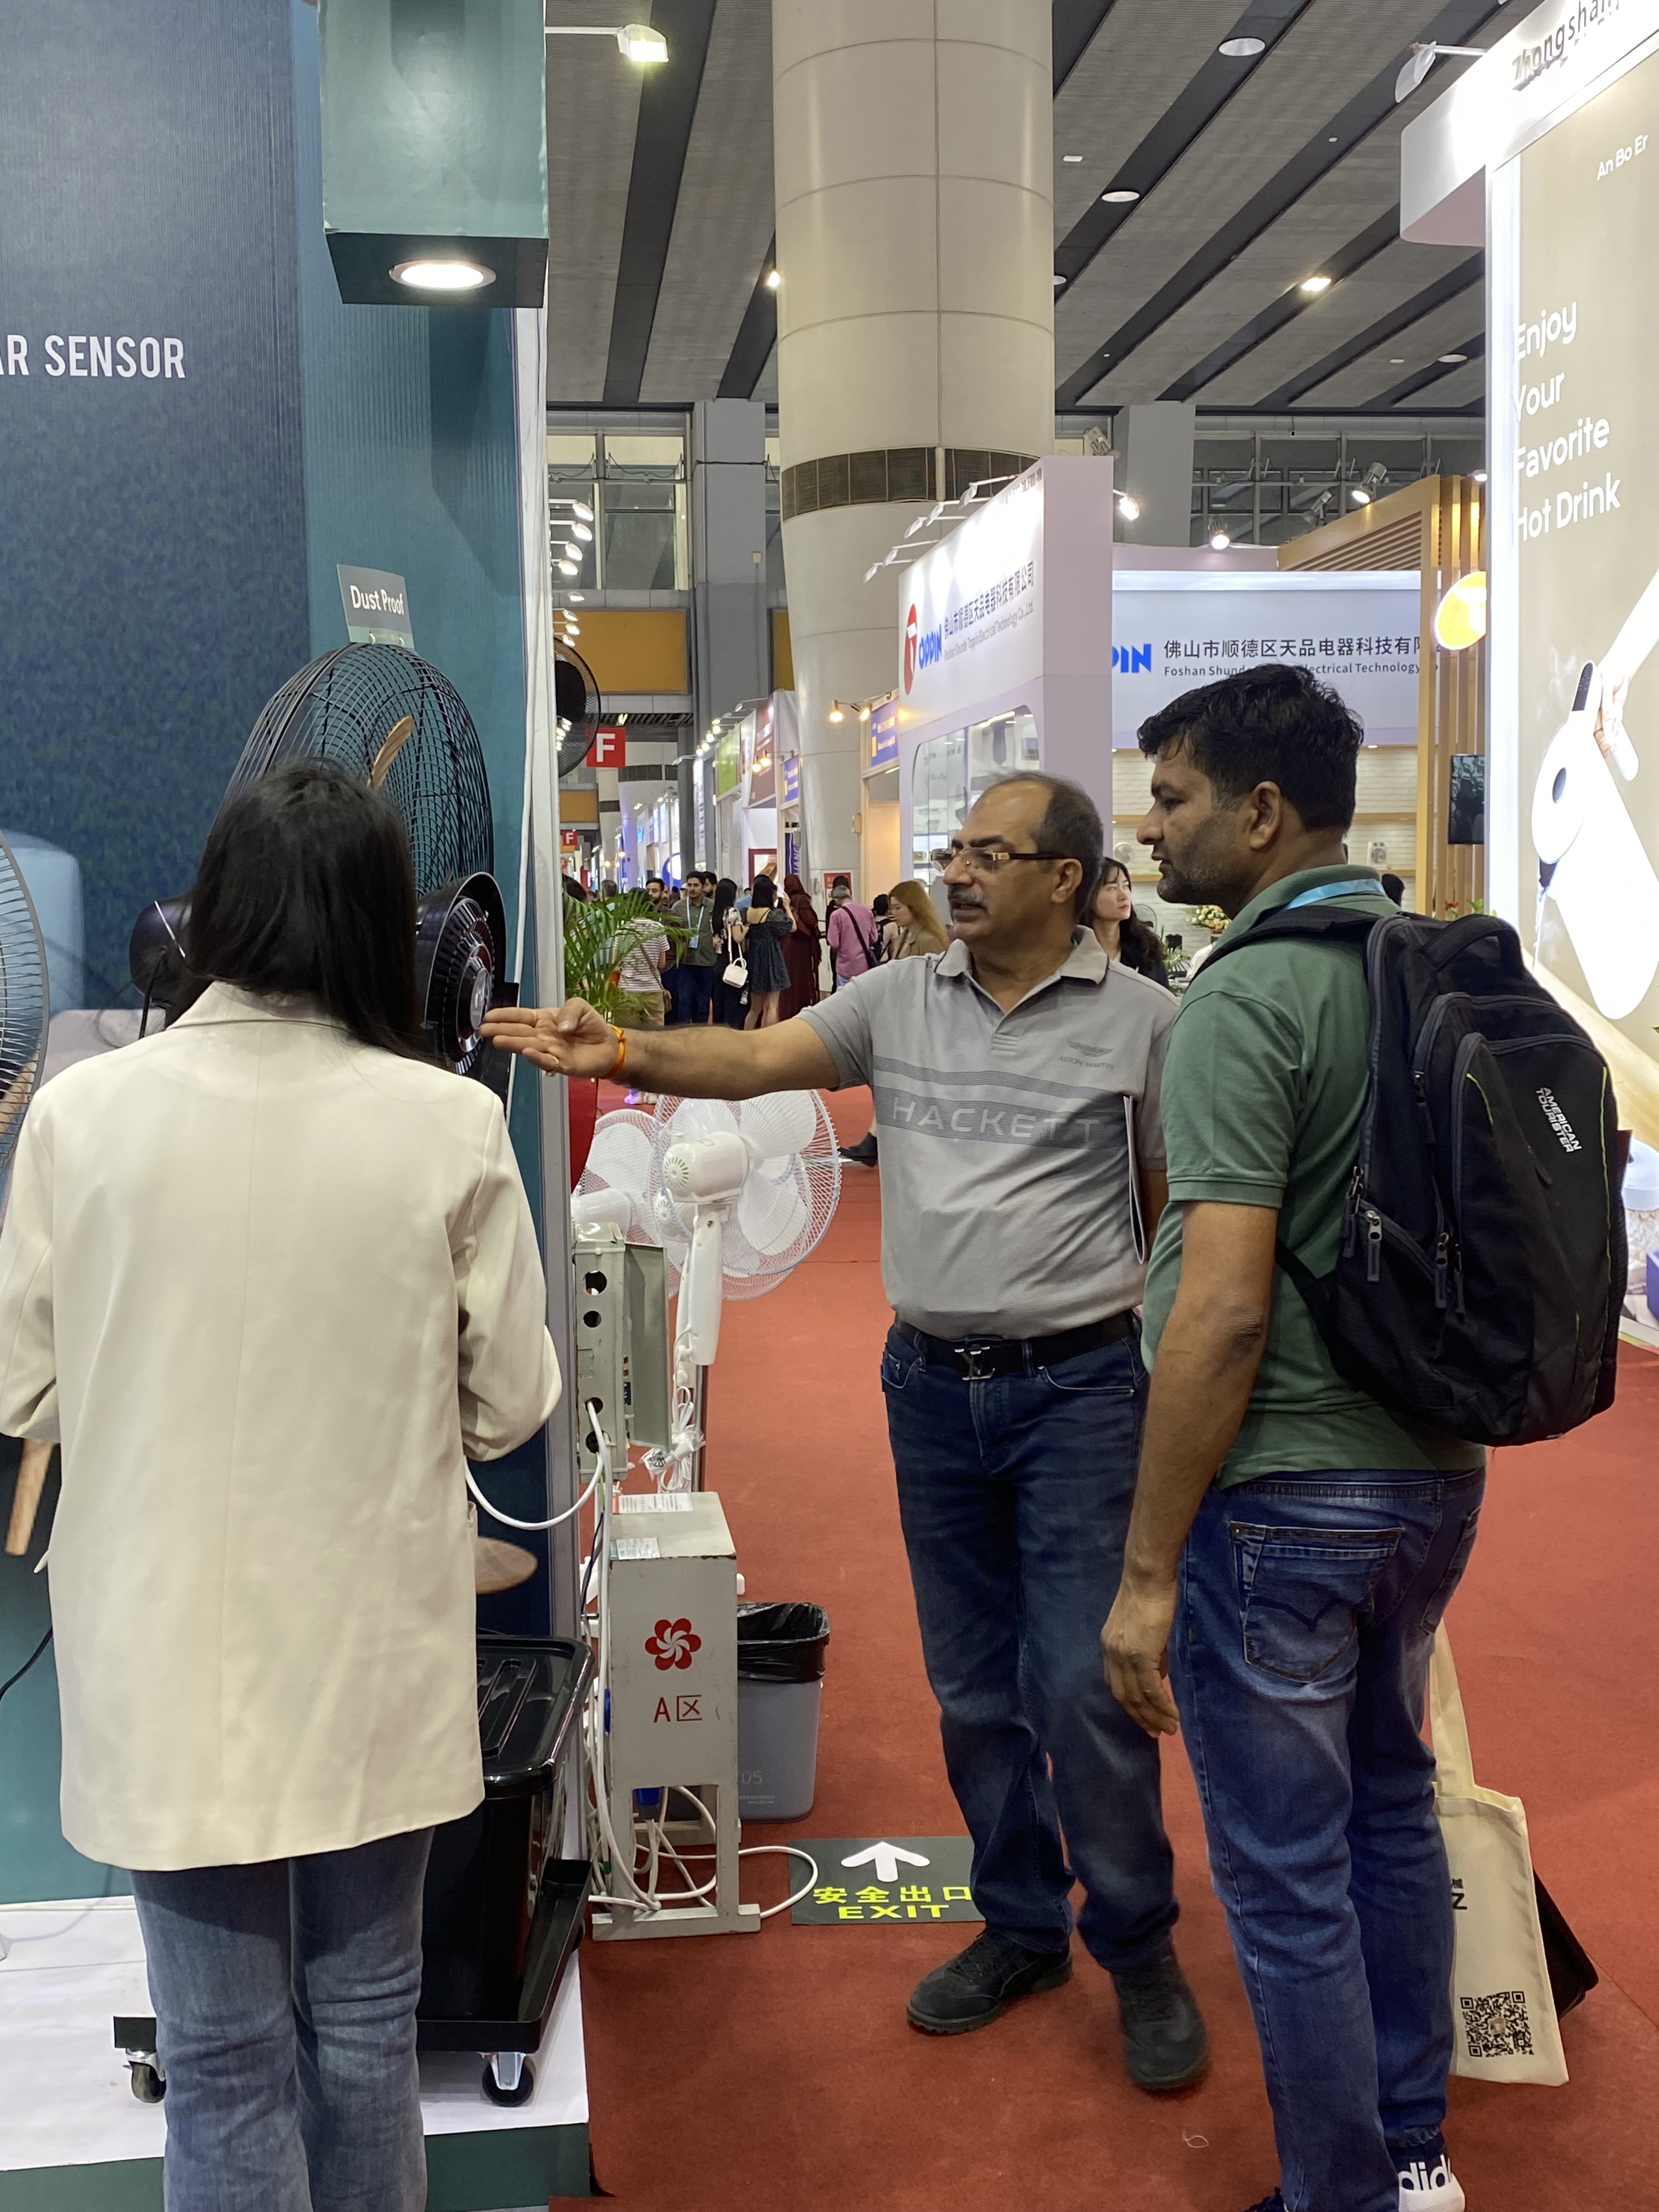 When customers walk through our booth, they are attracted by our BLDC mist fan and ask us about the product feature